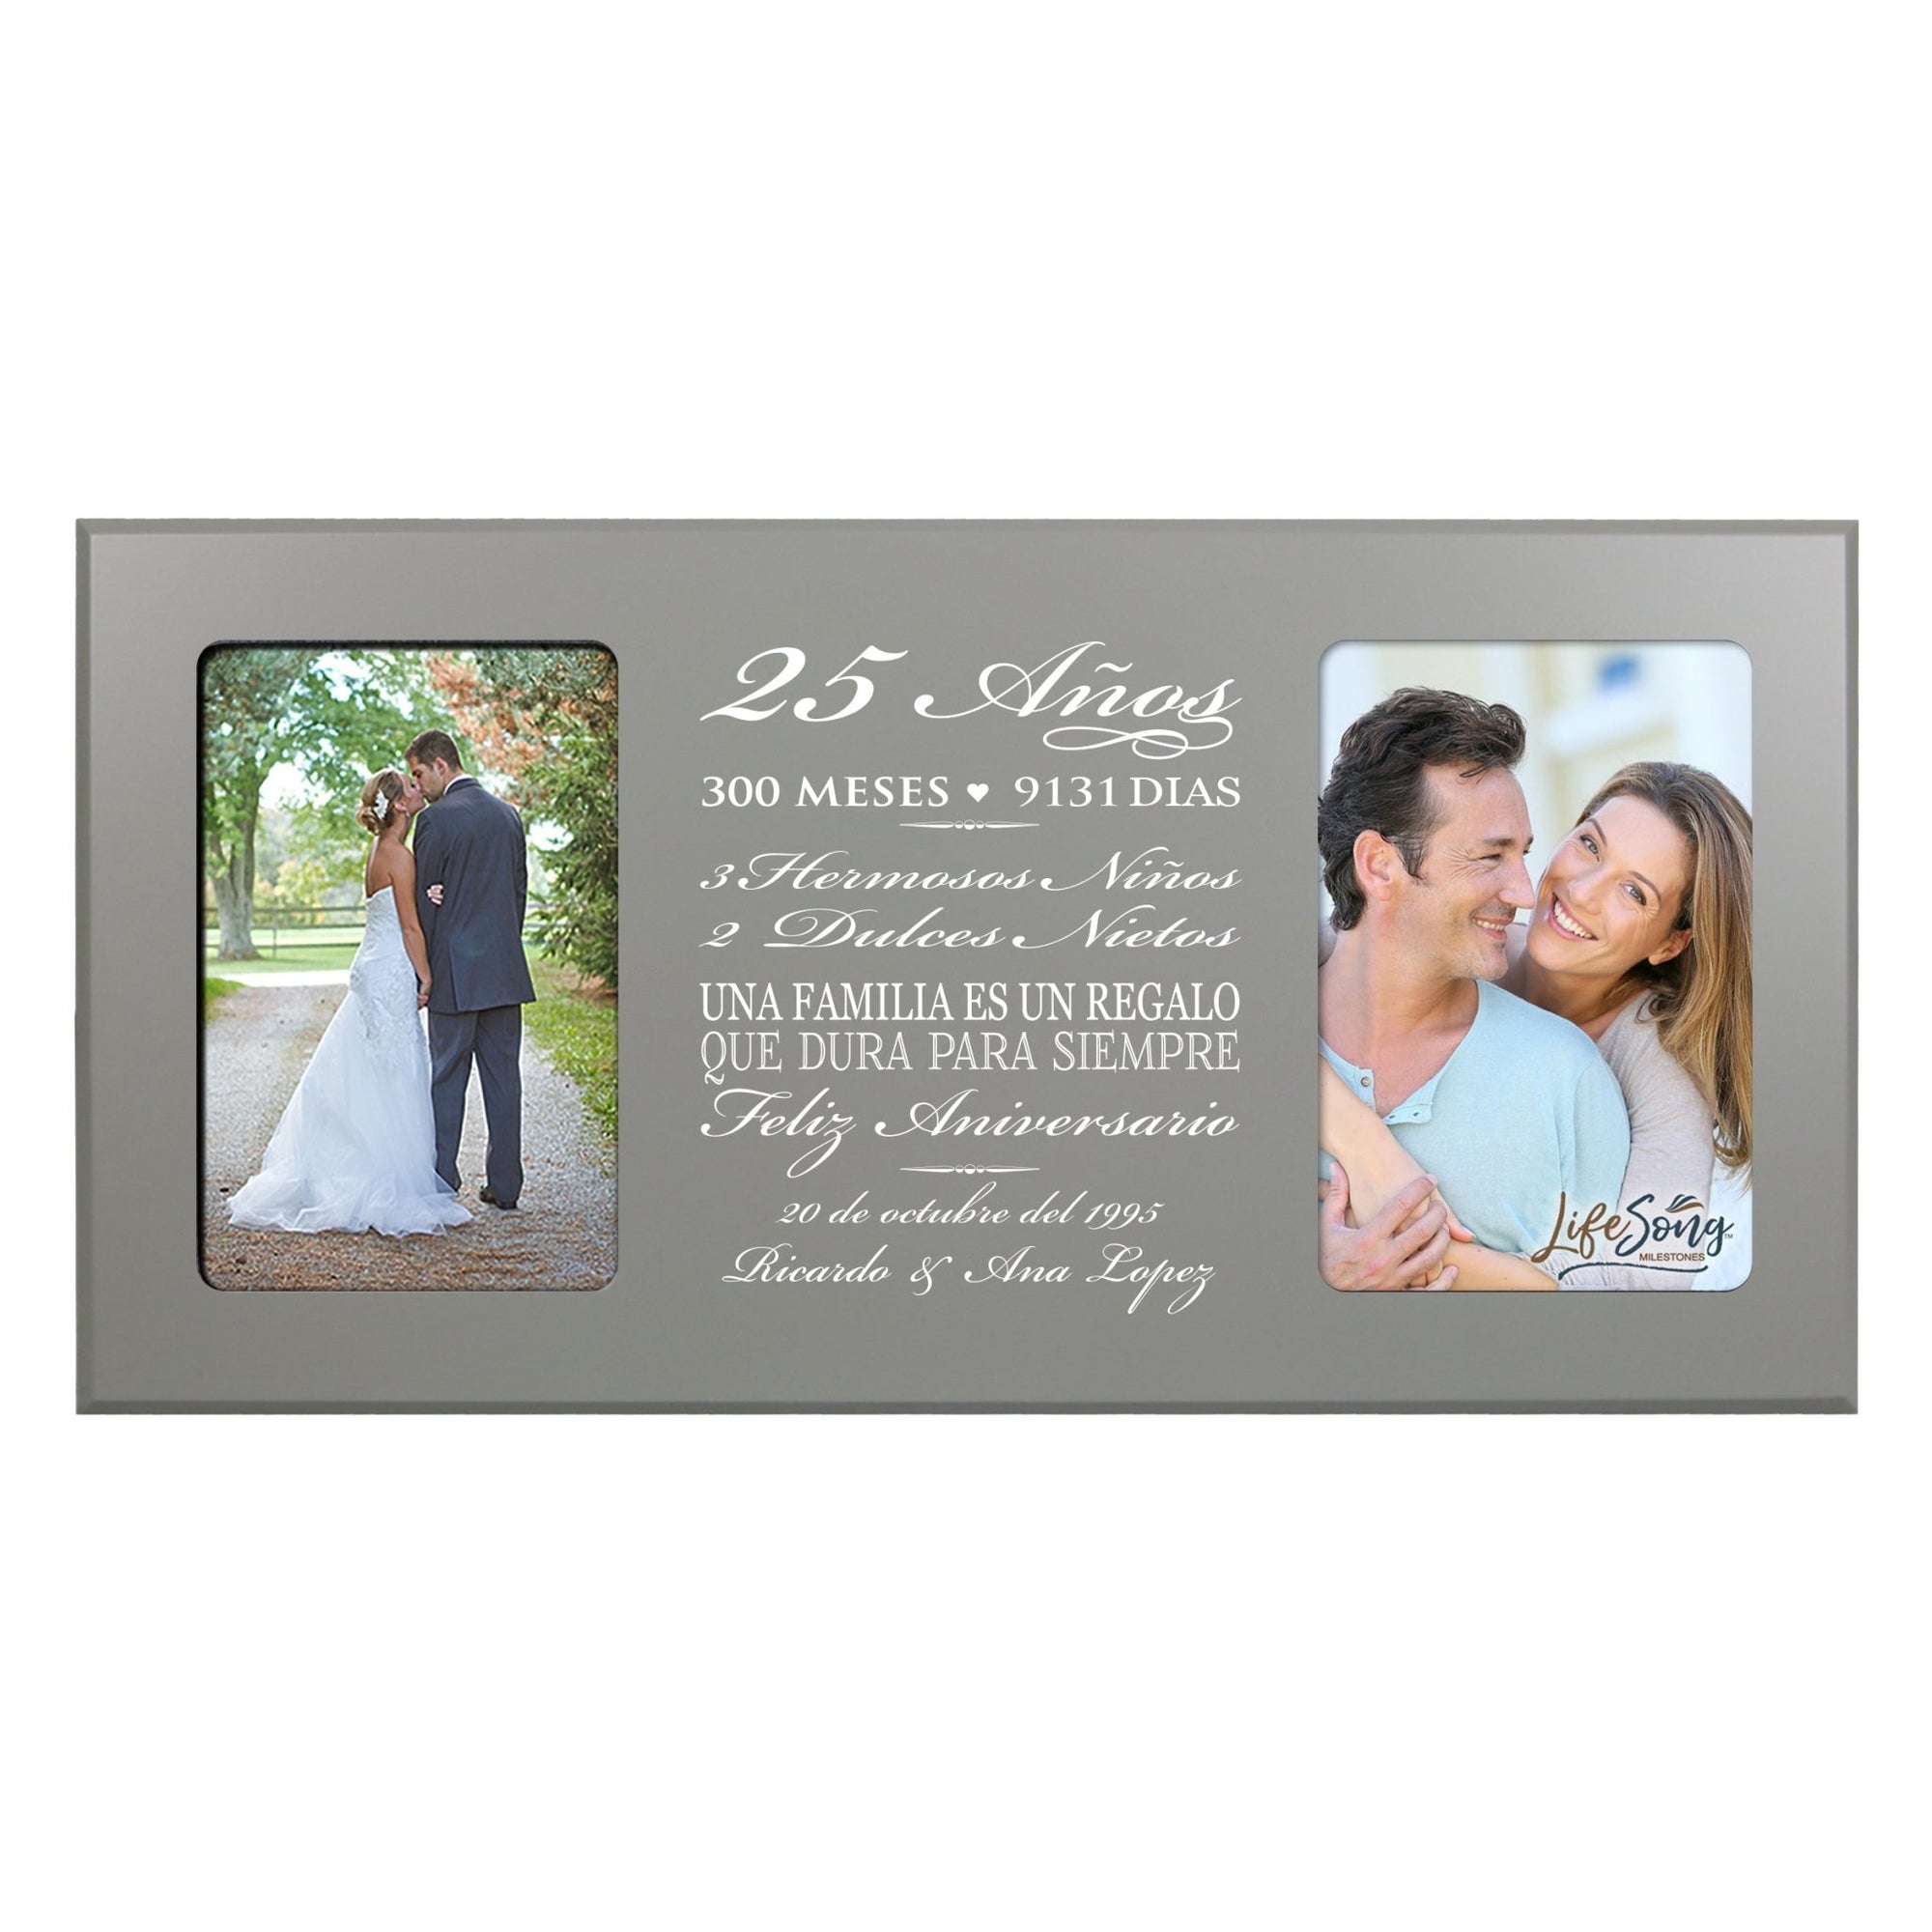 Lifesong Milestones Personalized Couples 25th Wedding Anniversary Spanish Picture Frame